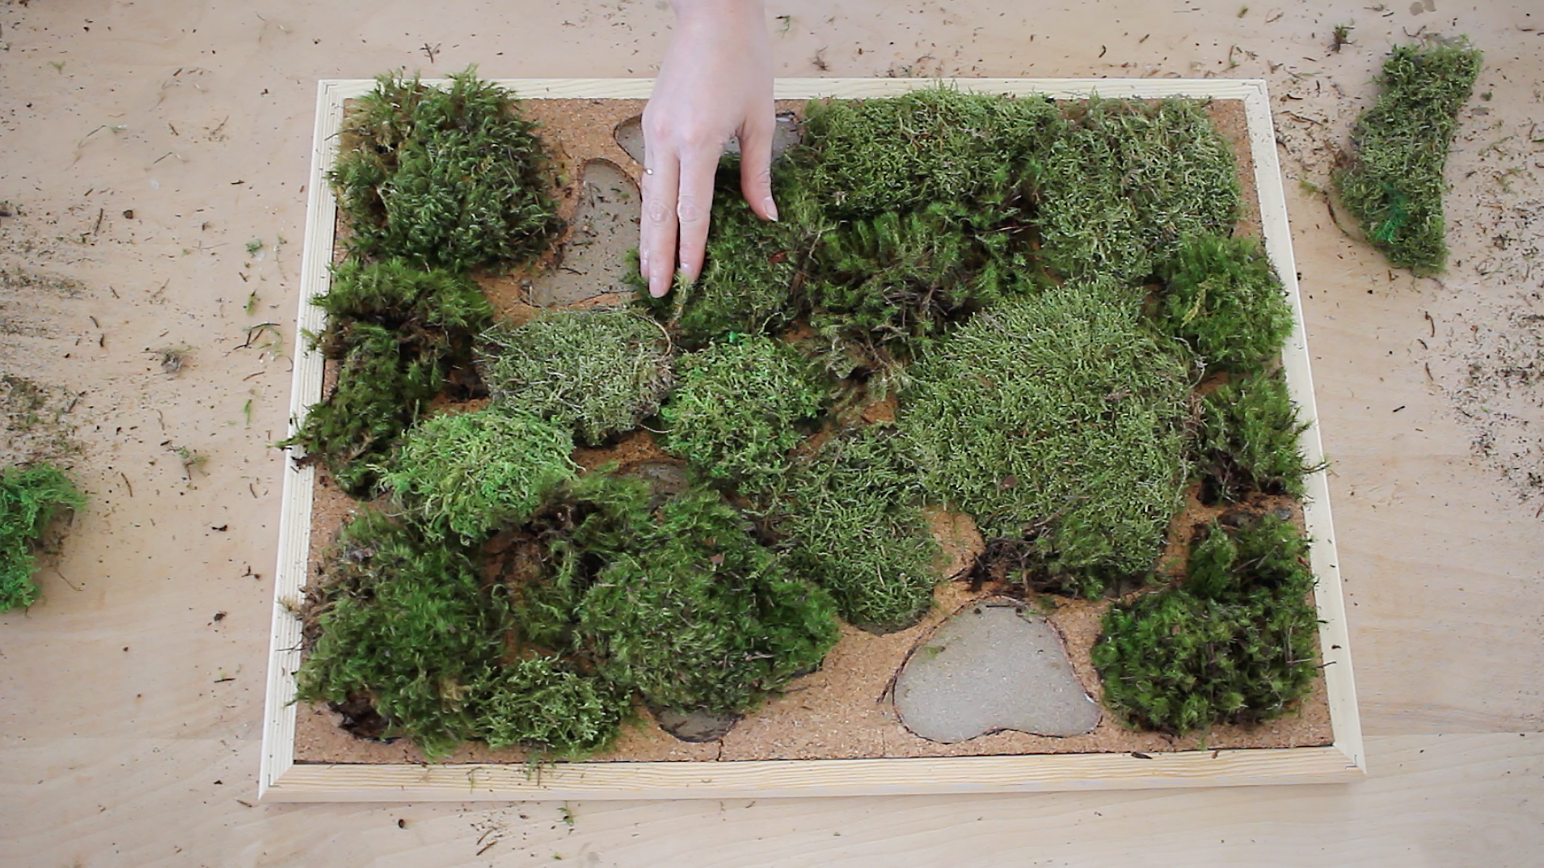 This Moss Shower Mat Lets You Dry Your Feet On Natural Living Moss When  Exiting The Shower